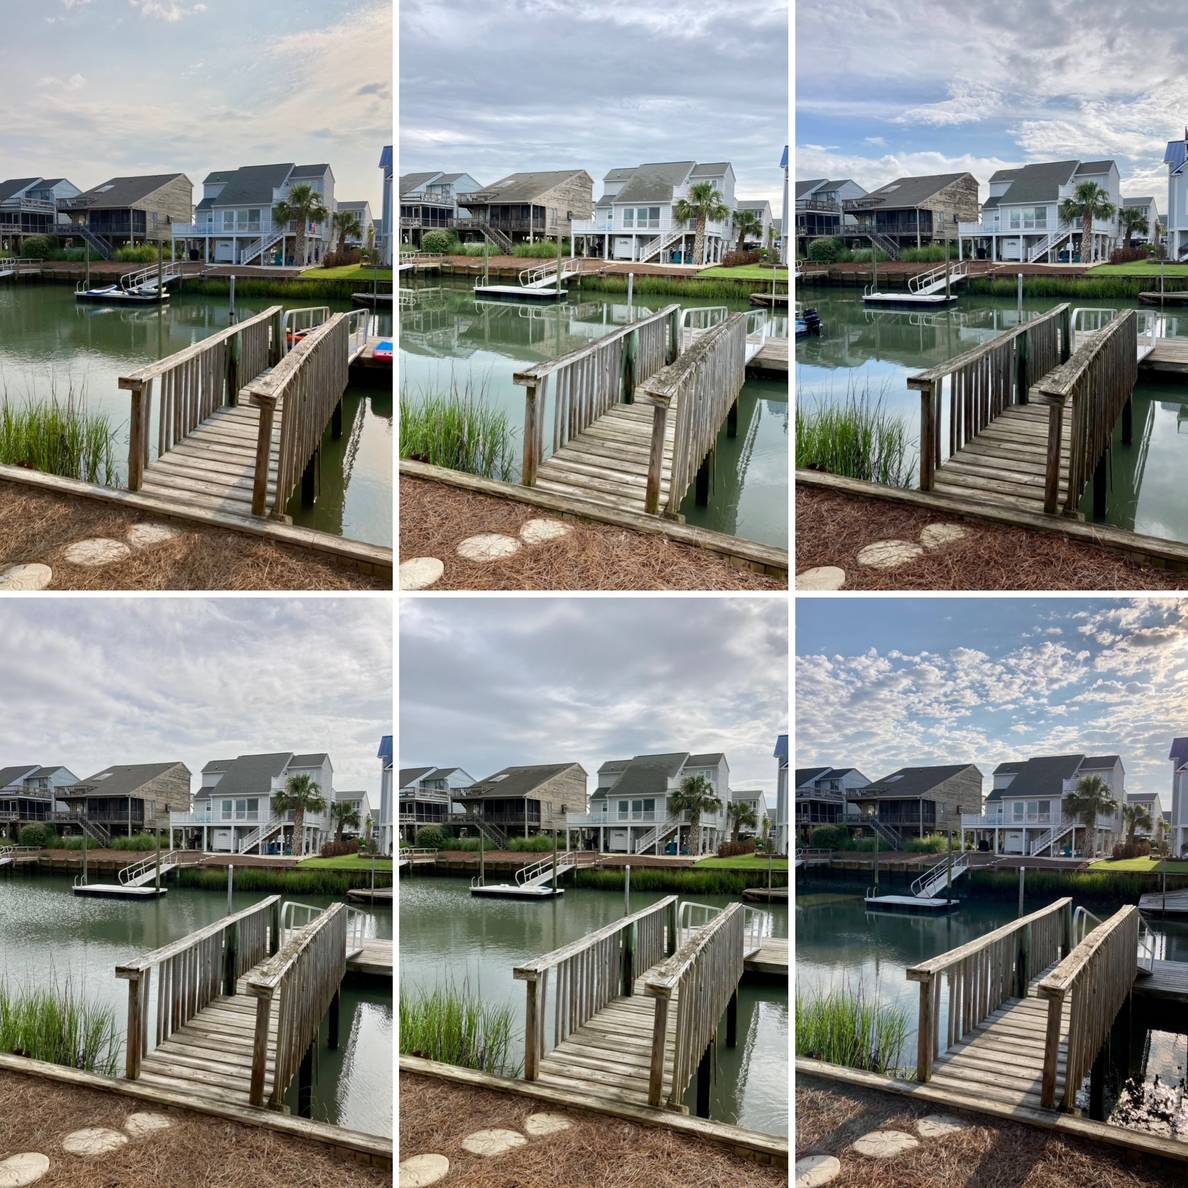 Six photos all showing a dock leading to a canal and houses on the opposite side. Each photo is a different day.